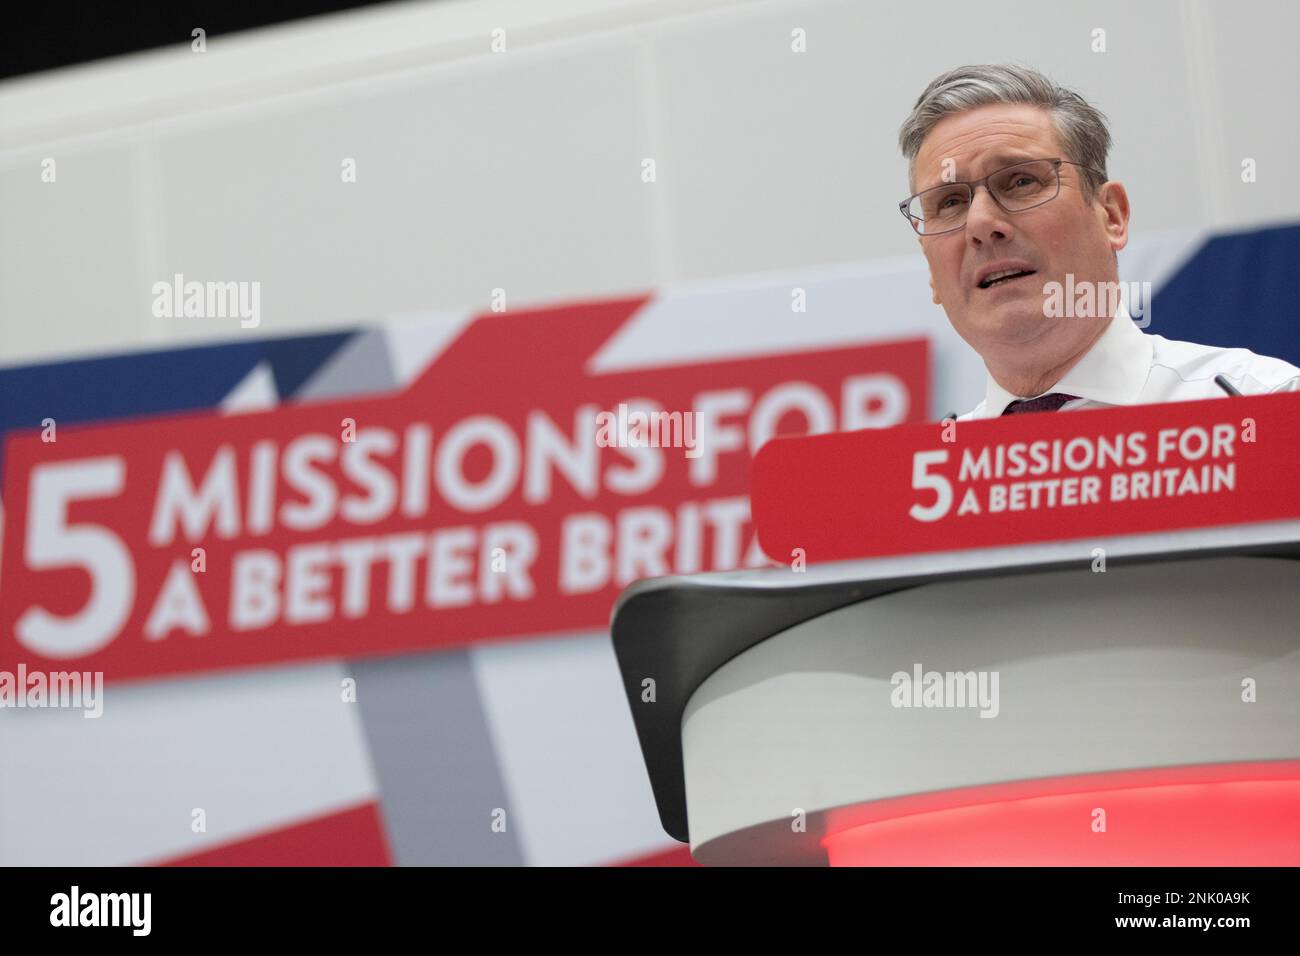 Manchester, UK. February 23rd, 2023.  Keir Starmer launches five bold missions for a better Britain at 1 Angel Square, Manchester UK. The Labour leader spoke in front of shadow cabinet colleagues and Manchester based politicians. He outlined the purpose of missions as. “It means providing a clear set of priorities. A relentless focus on the things that matter most.” Picture: garyroberts/worldwidefeatures.com/Alamy Live News Stock Photo